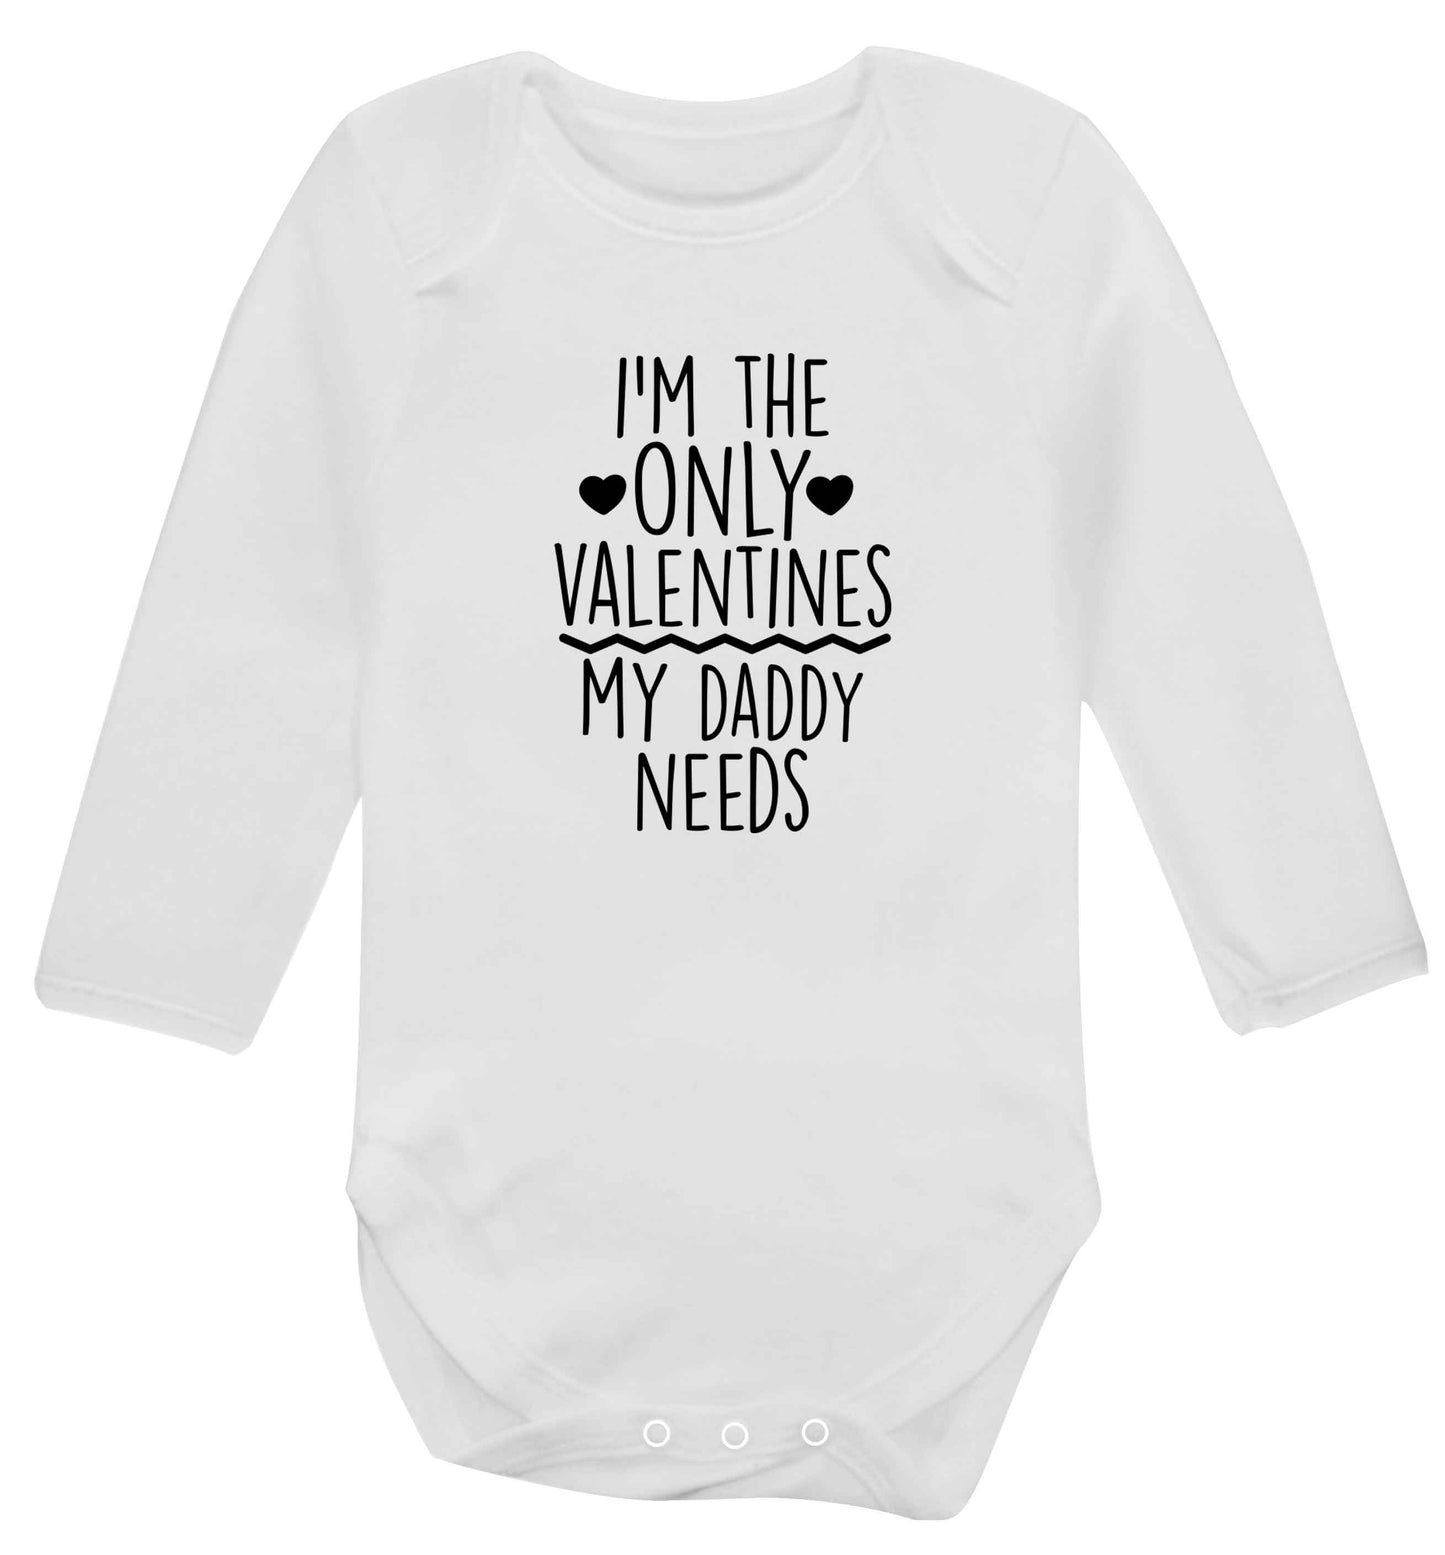 I'm the only valentines my daddy needs baby vest long sleeved white 6-12 months